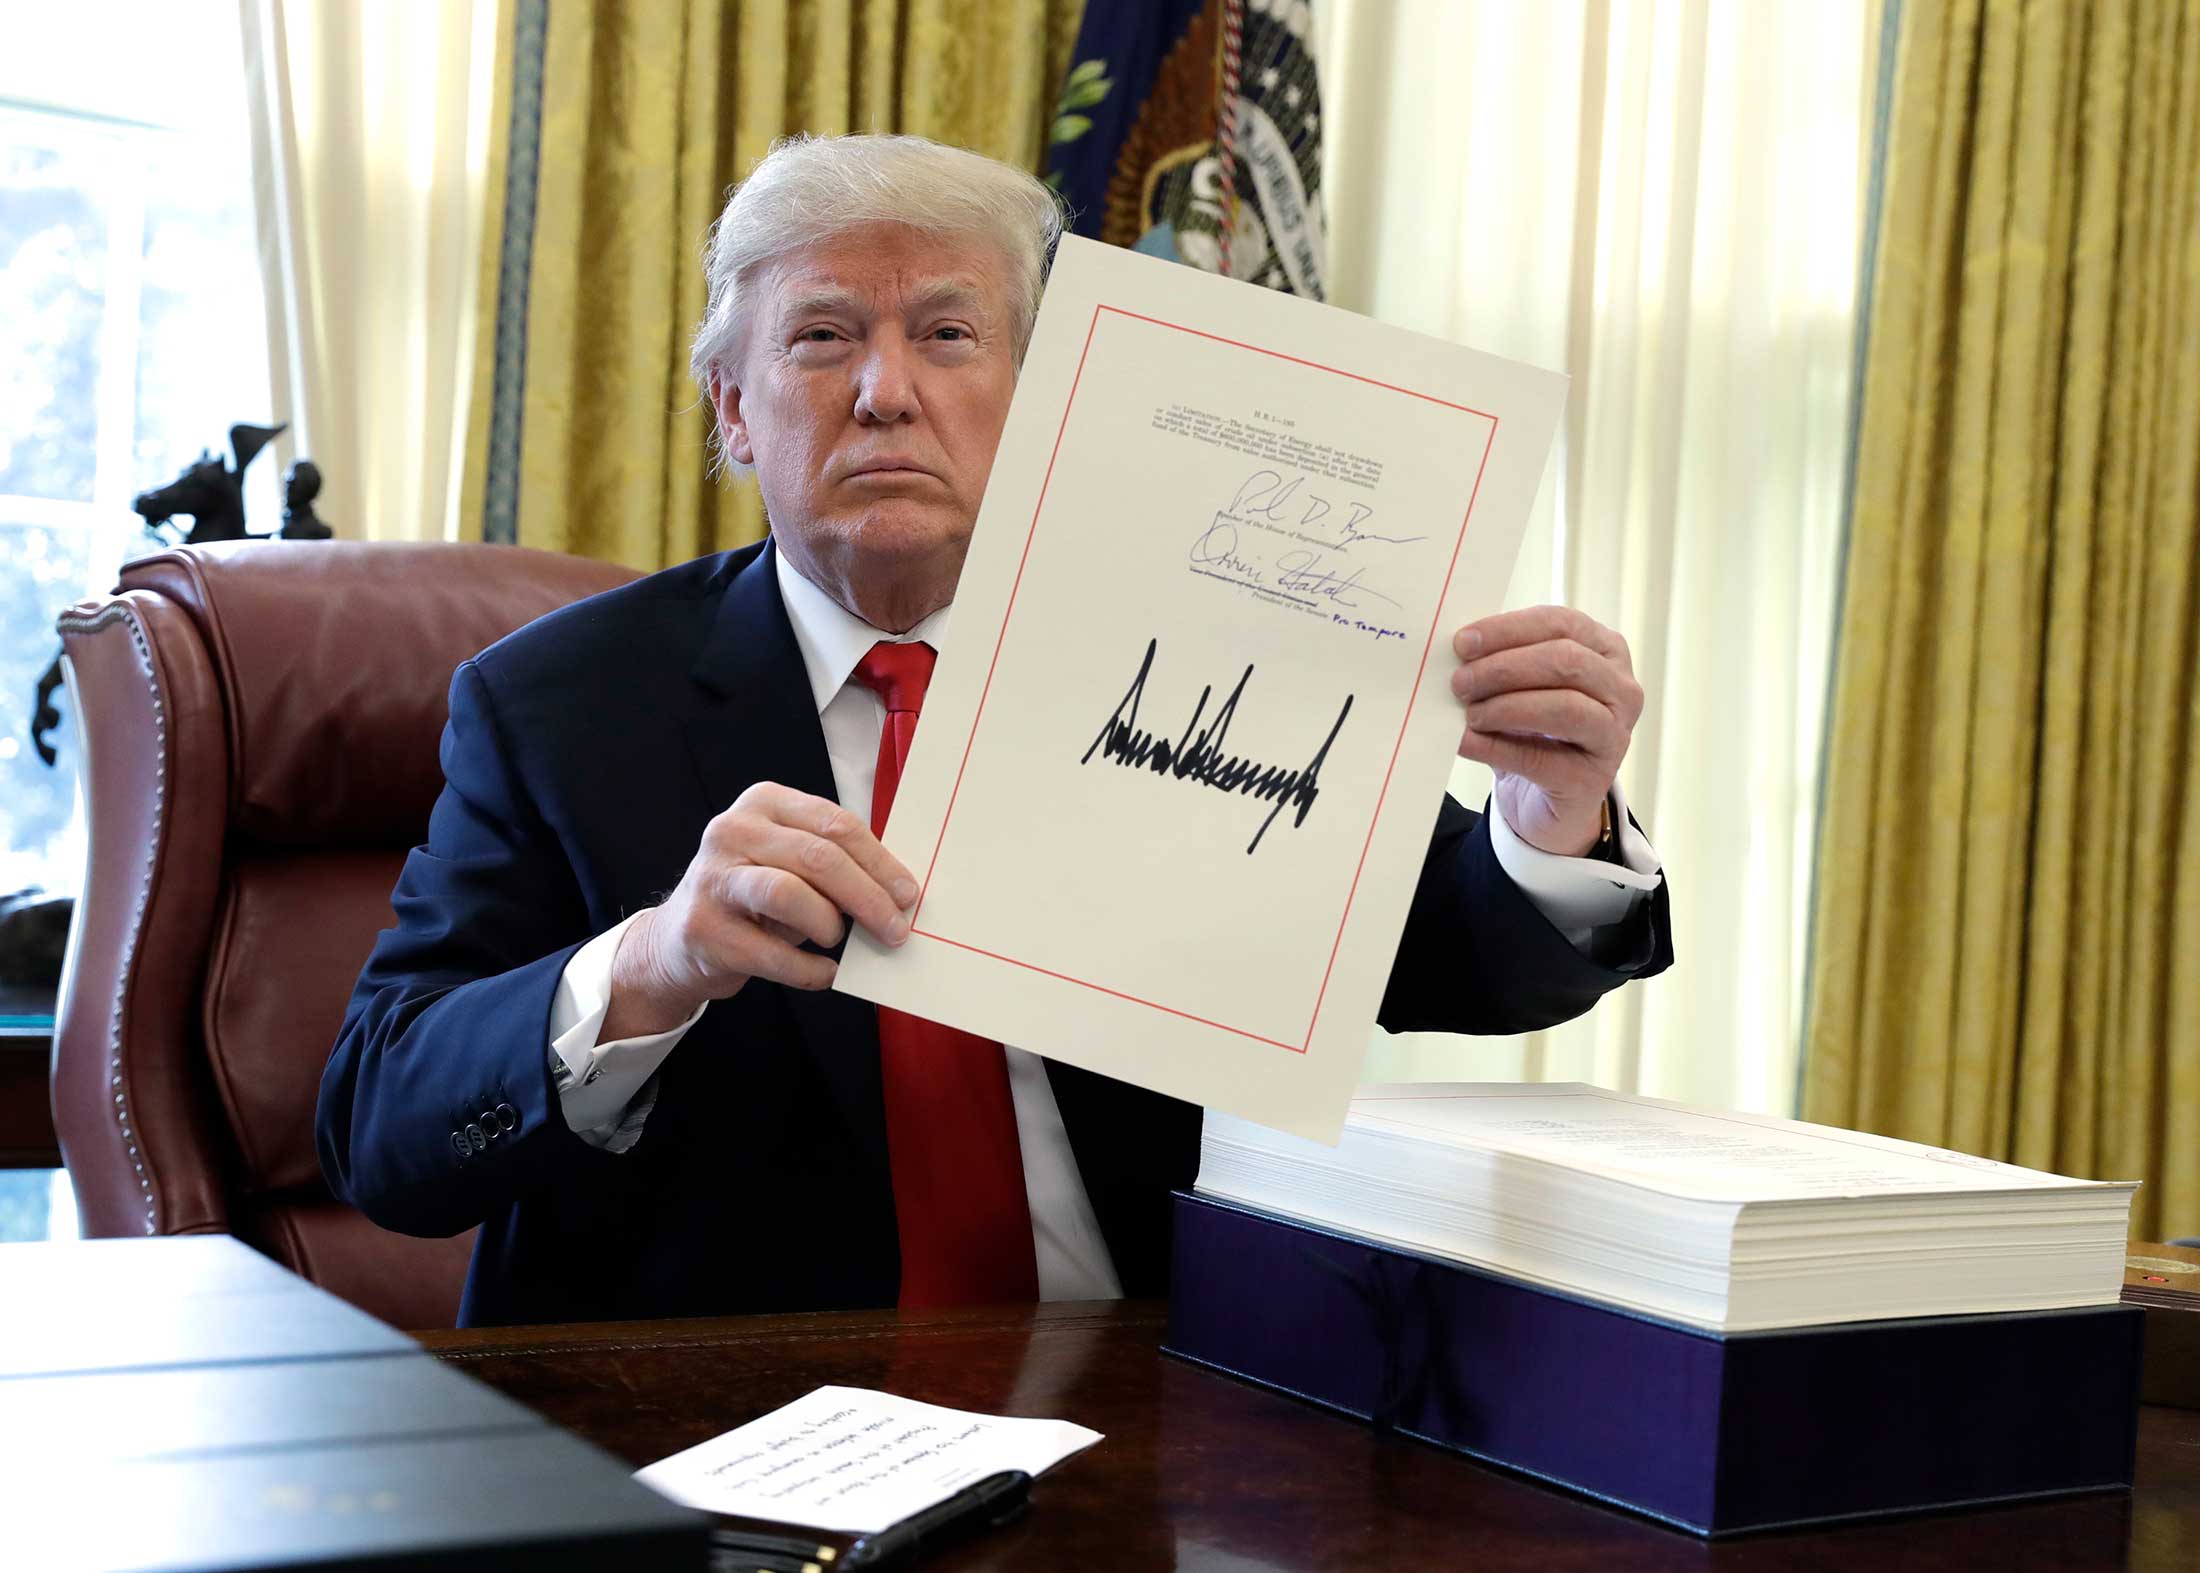 President Trump shows his signature on a $1.5 trillion tax overhaul package in the Oval Office of the White House on Dec. 22, 2017.&nbsp;